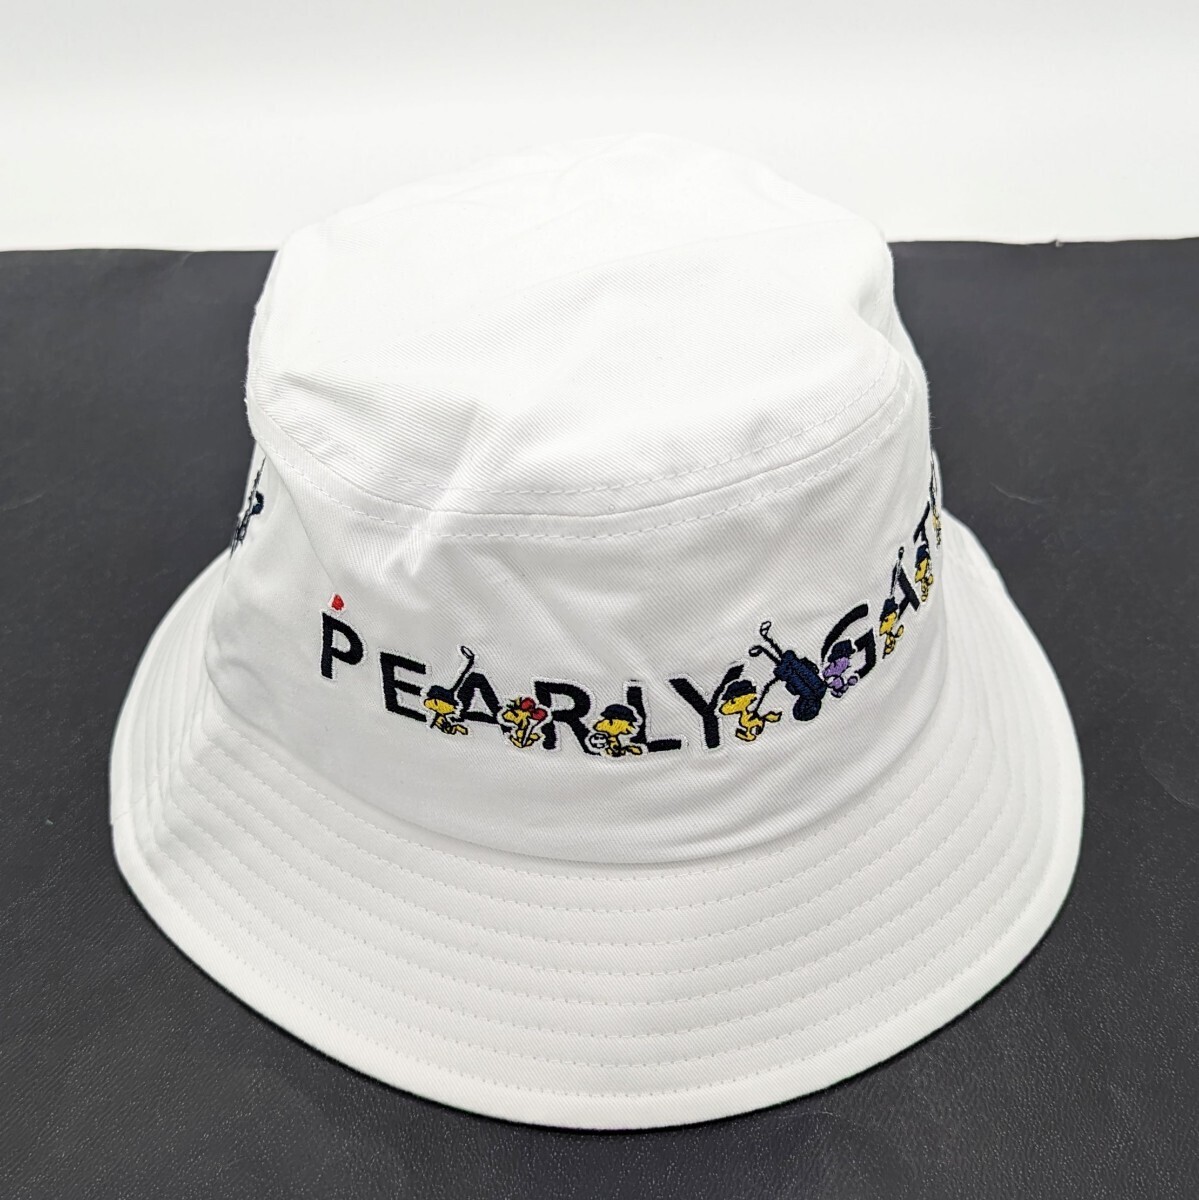 * new goods regular goods most new work model PEARLYGATES/ Pearly Gates SNOOPY hat (UNISEX) Snoopy . proportion ... inspection .. limitation collection 